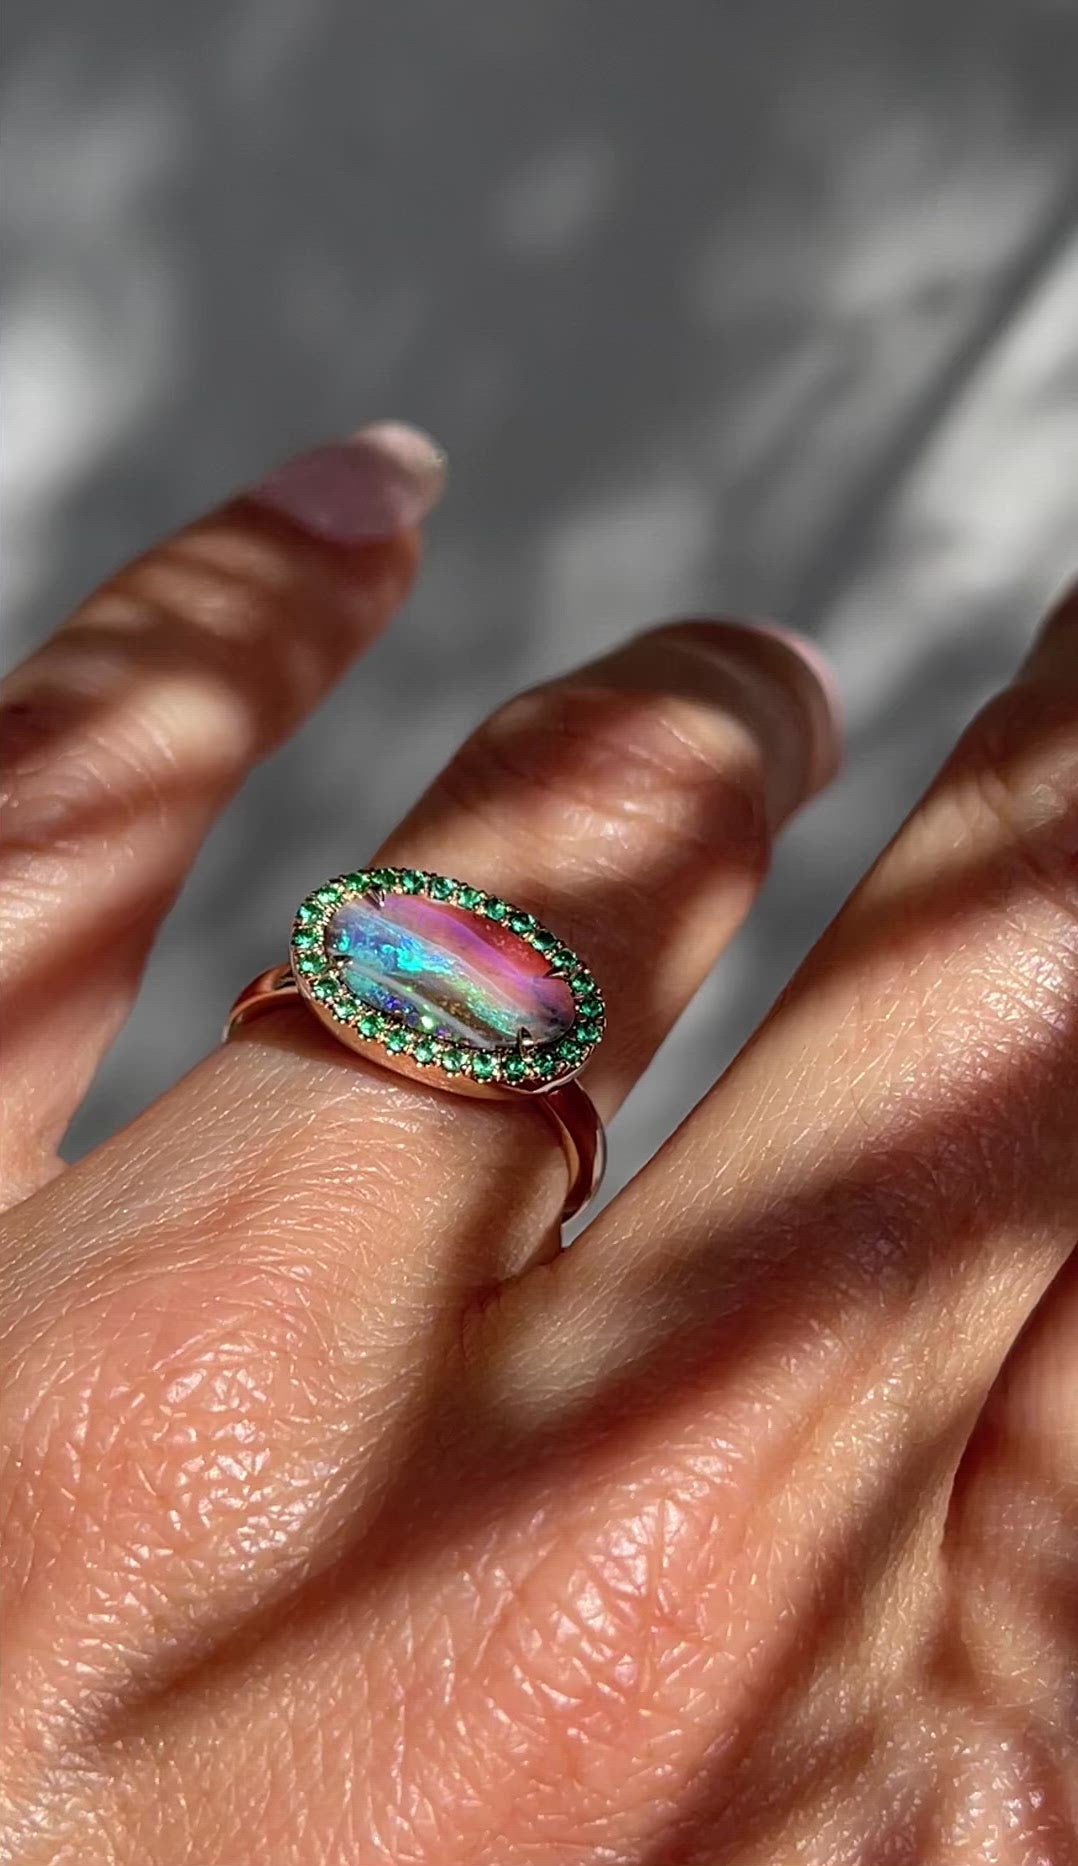 Video of Australian Opal and Emerald Ring by NIXIN Jewelry modeled on hand. Rose gold boulder opal ring.